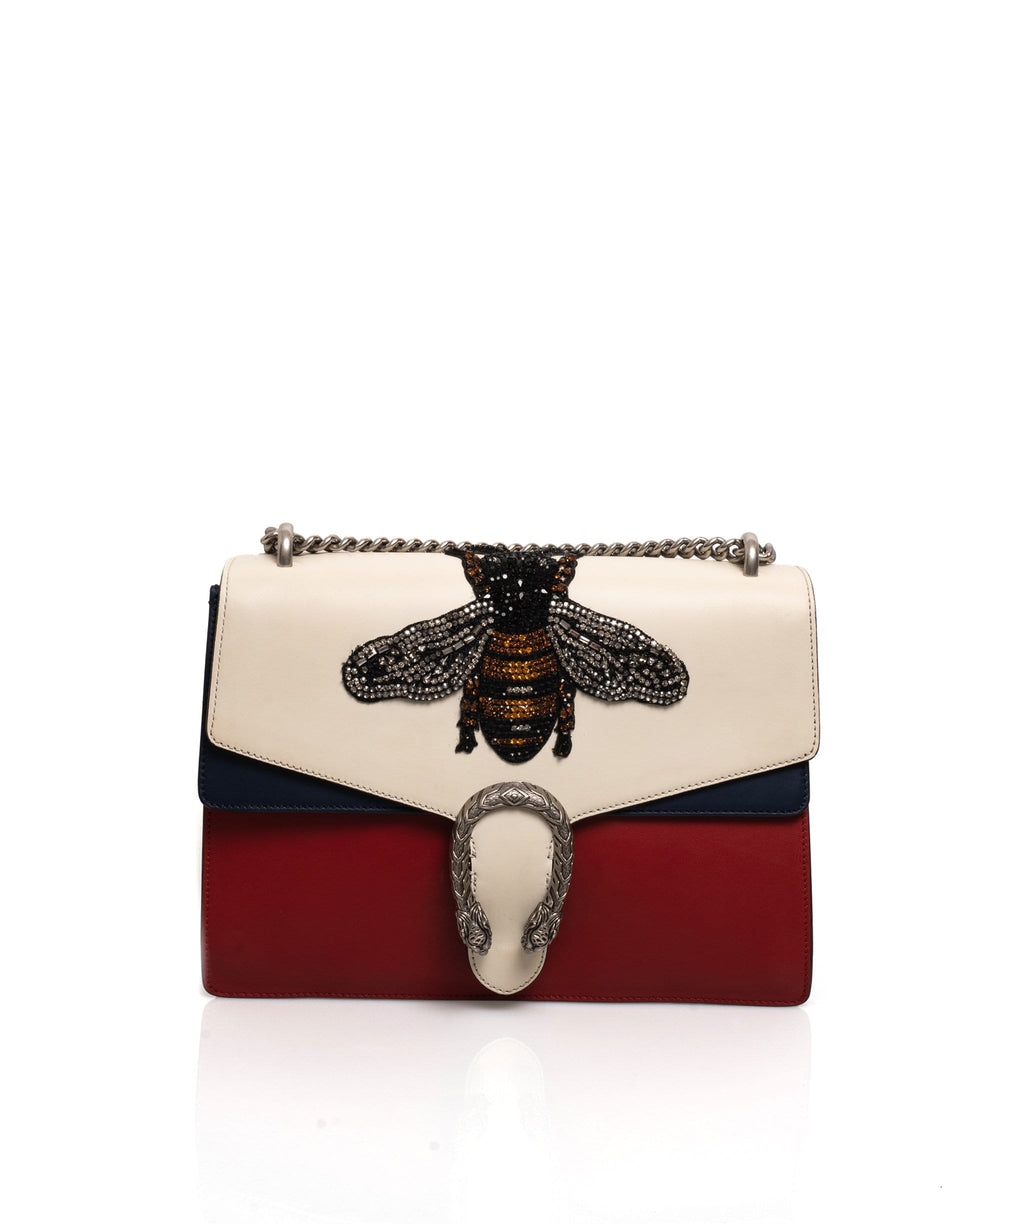 gucci bags gucci bee embroidered dionysus flap bag adl1399